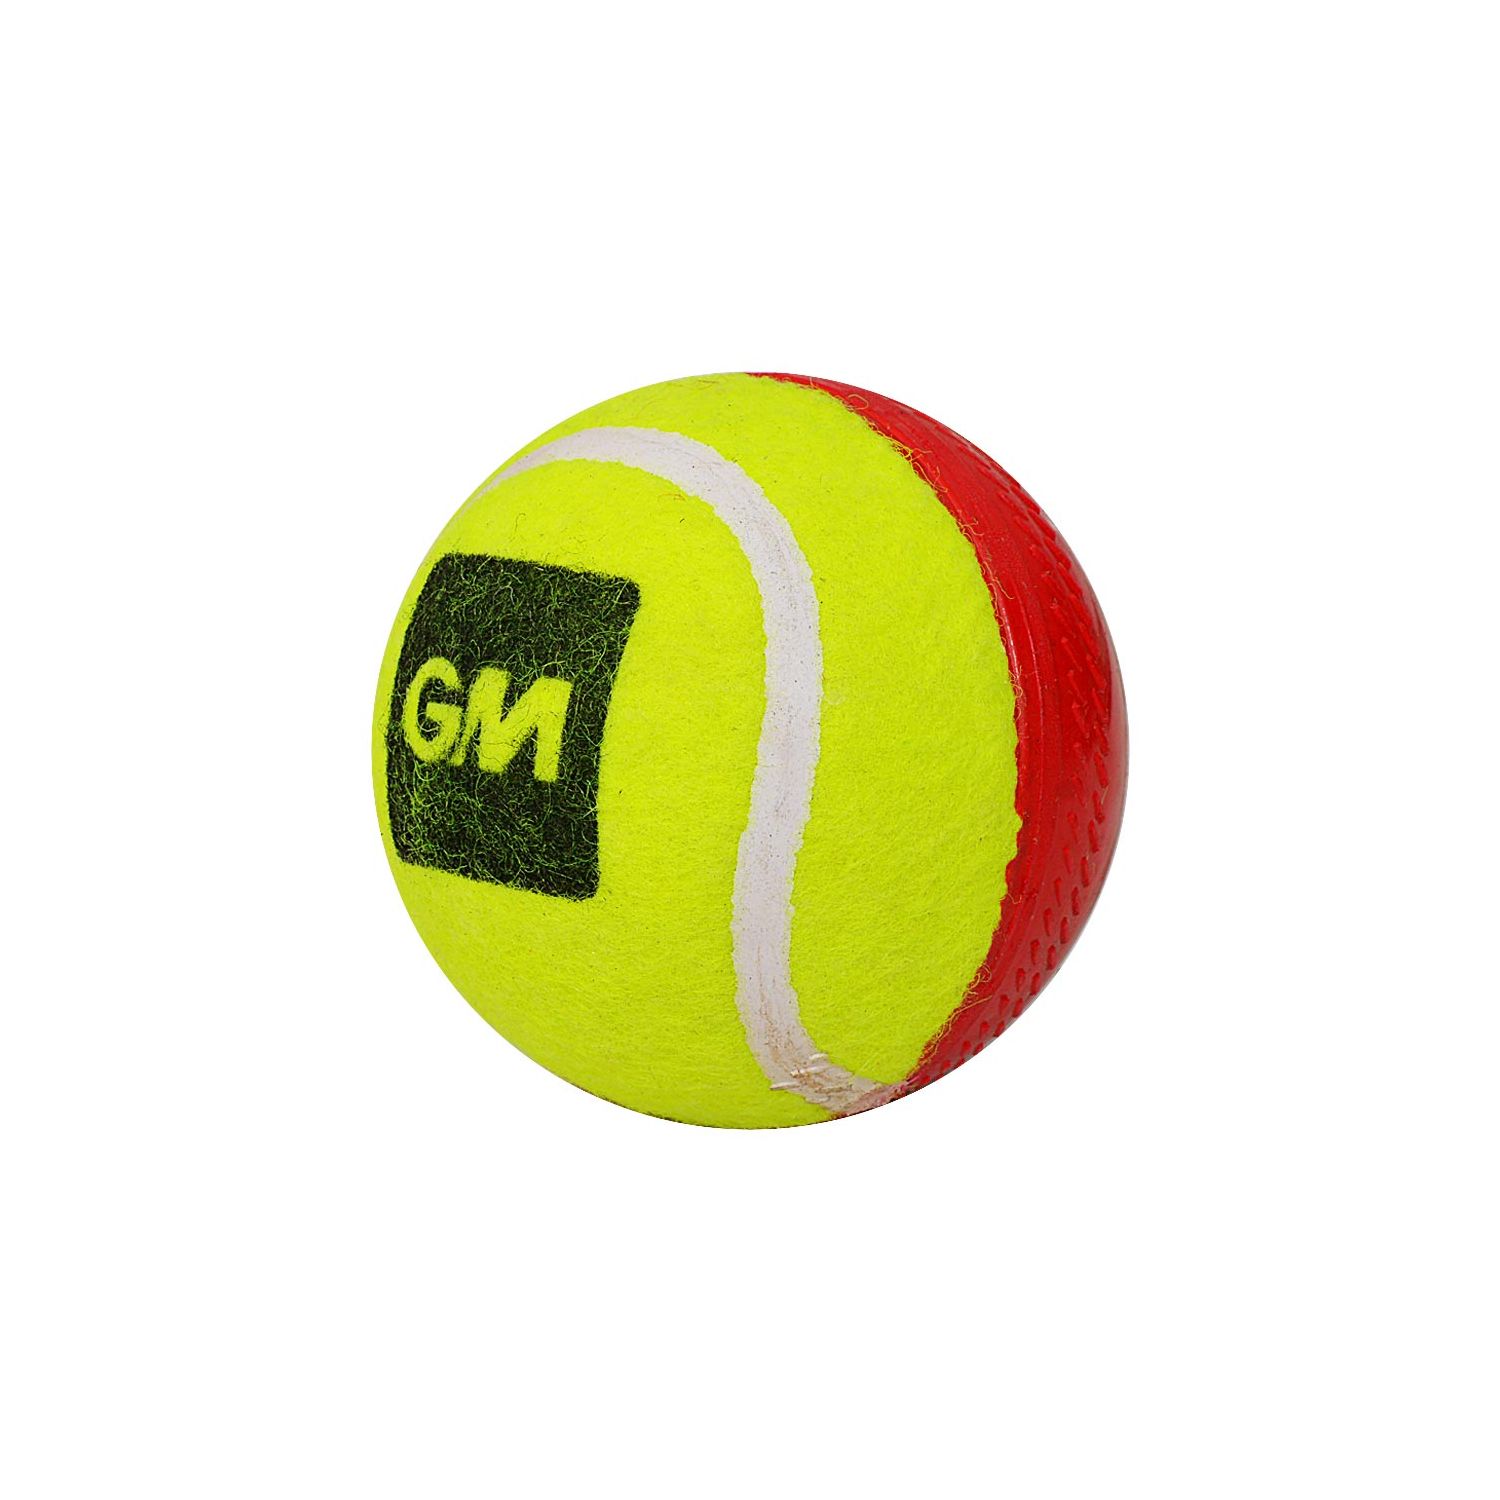 Swing King Cricket Ball (Red/Yellow)